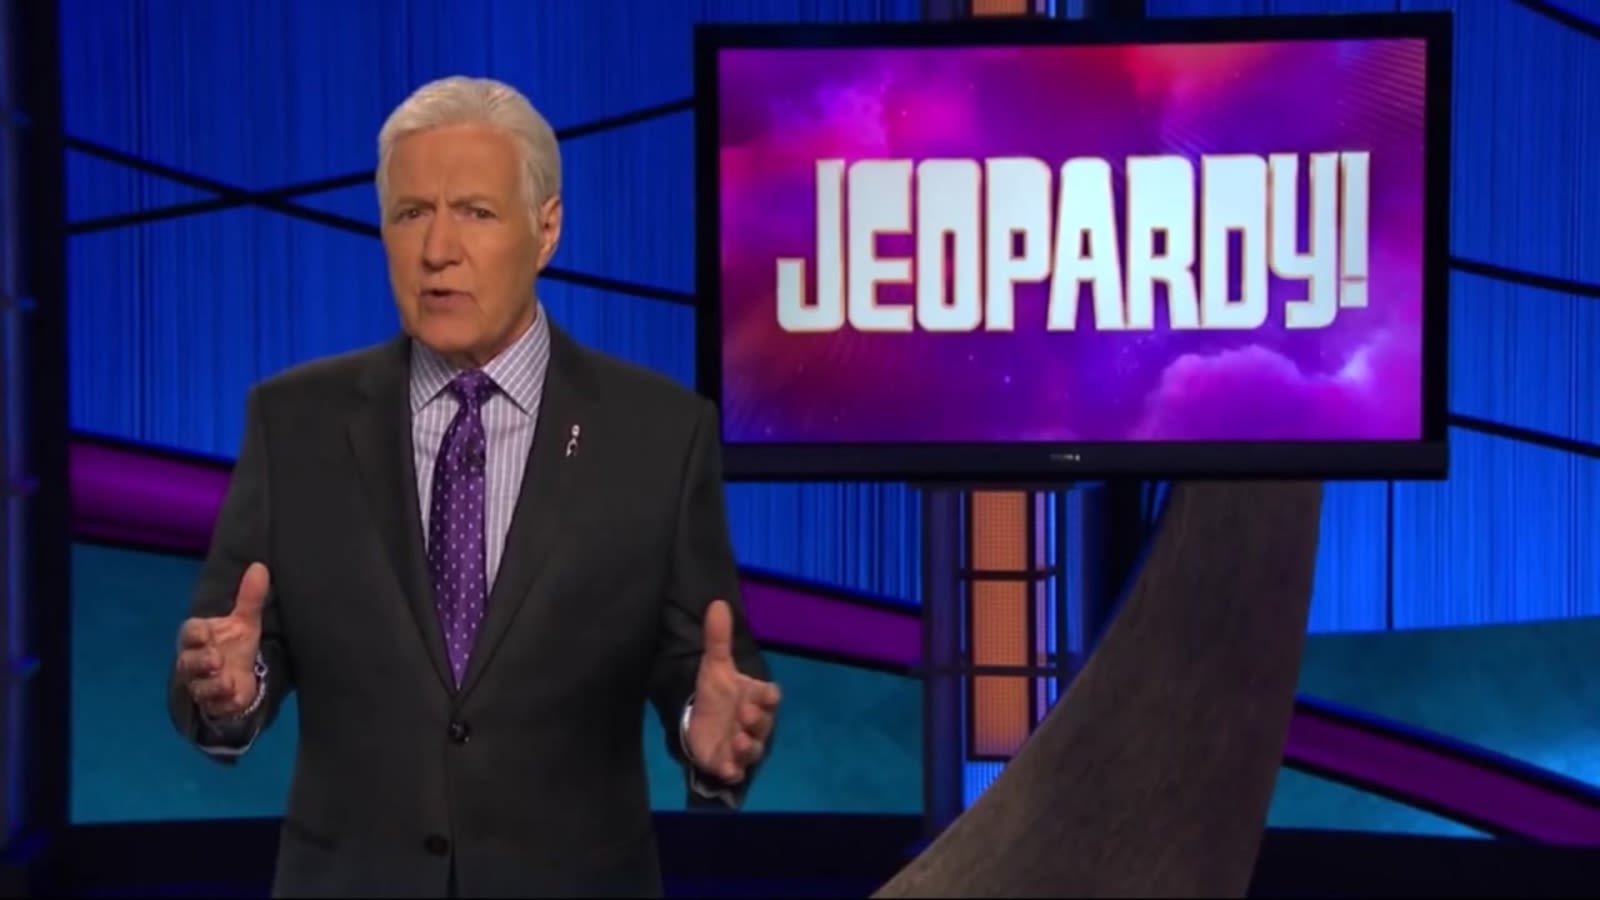 Where Jeopardy! ex-host Mike Richards is now - from high-powered